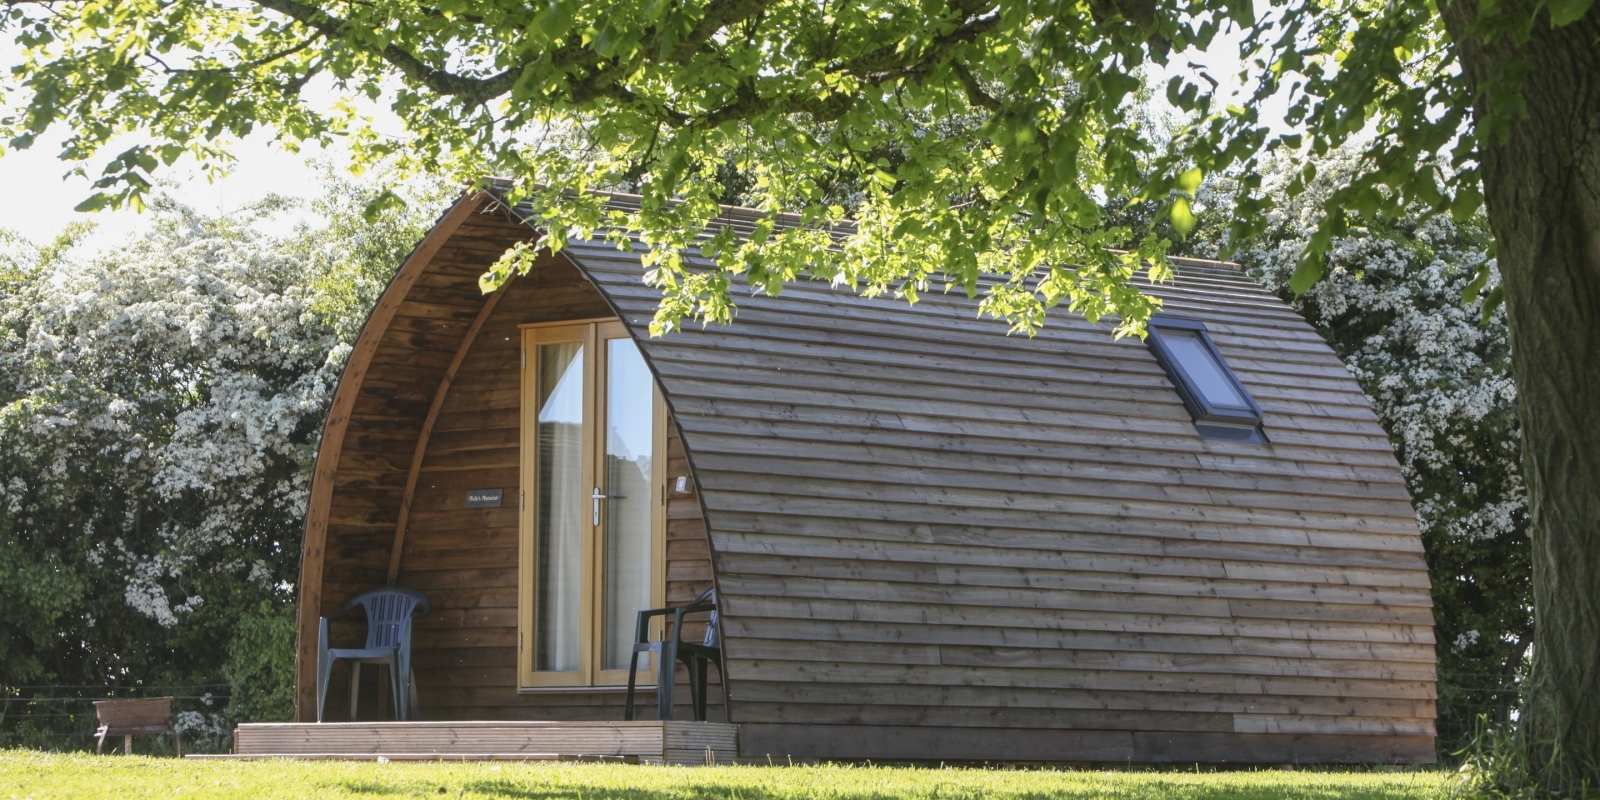 Enjoy staying in our heated en-suite wooden Wigwams